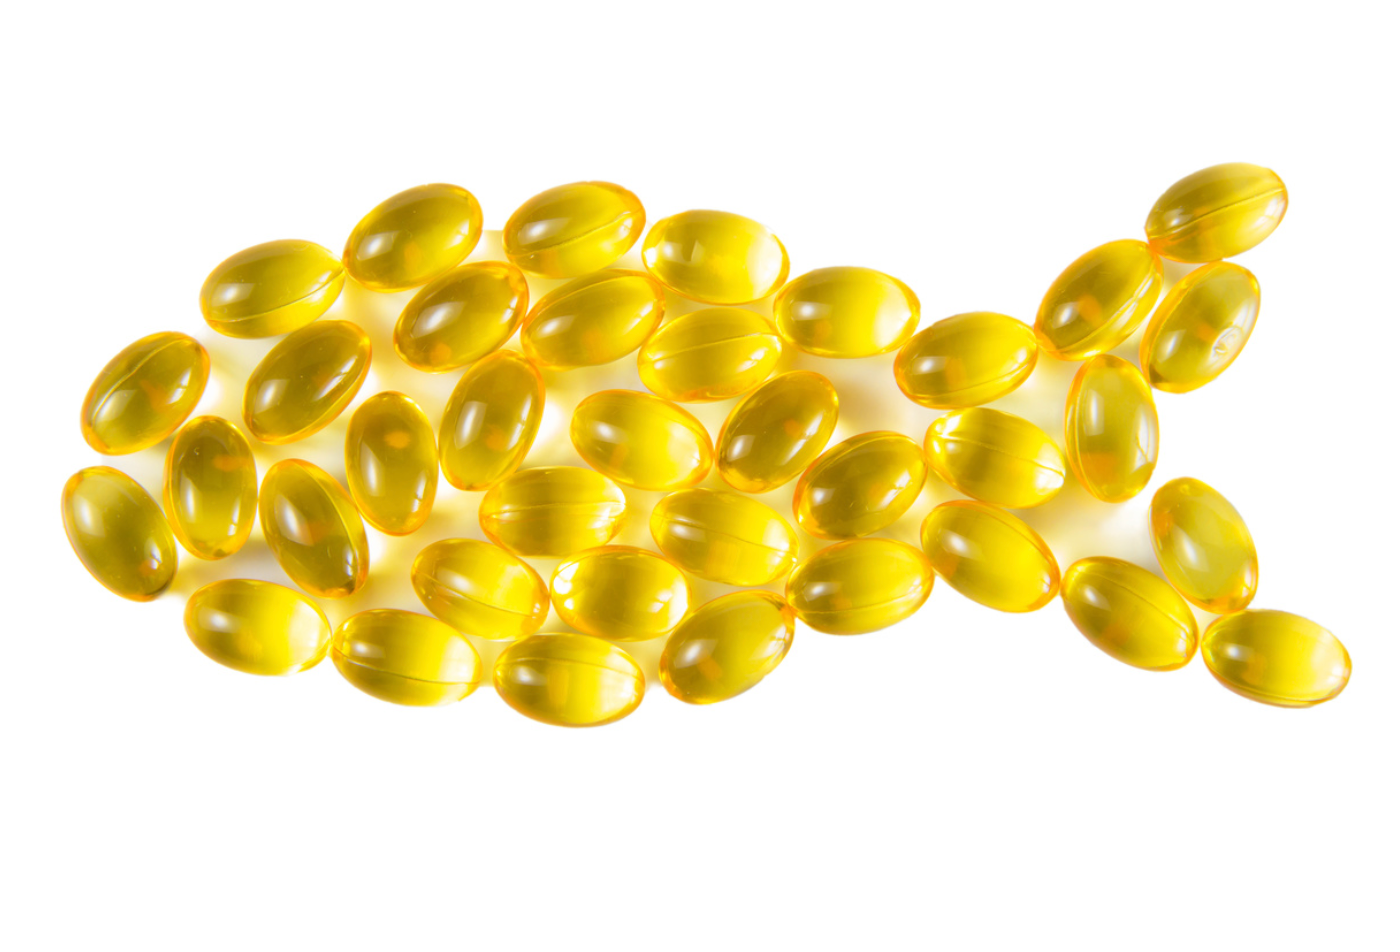 What Pharmacists Need to Know About Omega-3 Fatty Acids and Fish Oil Supplements